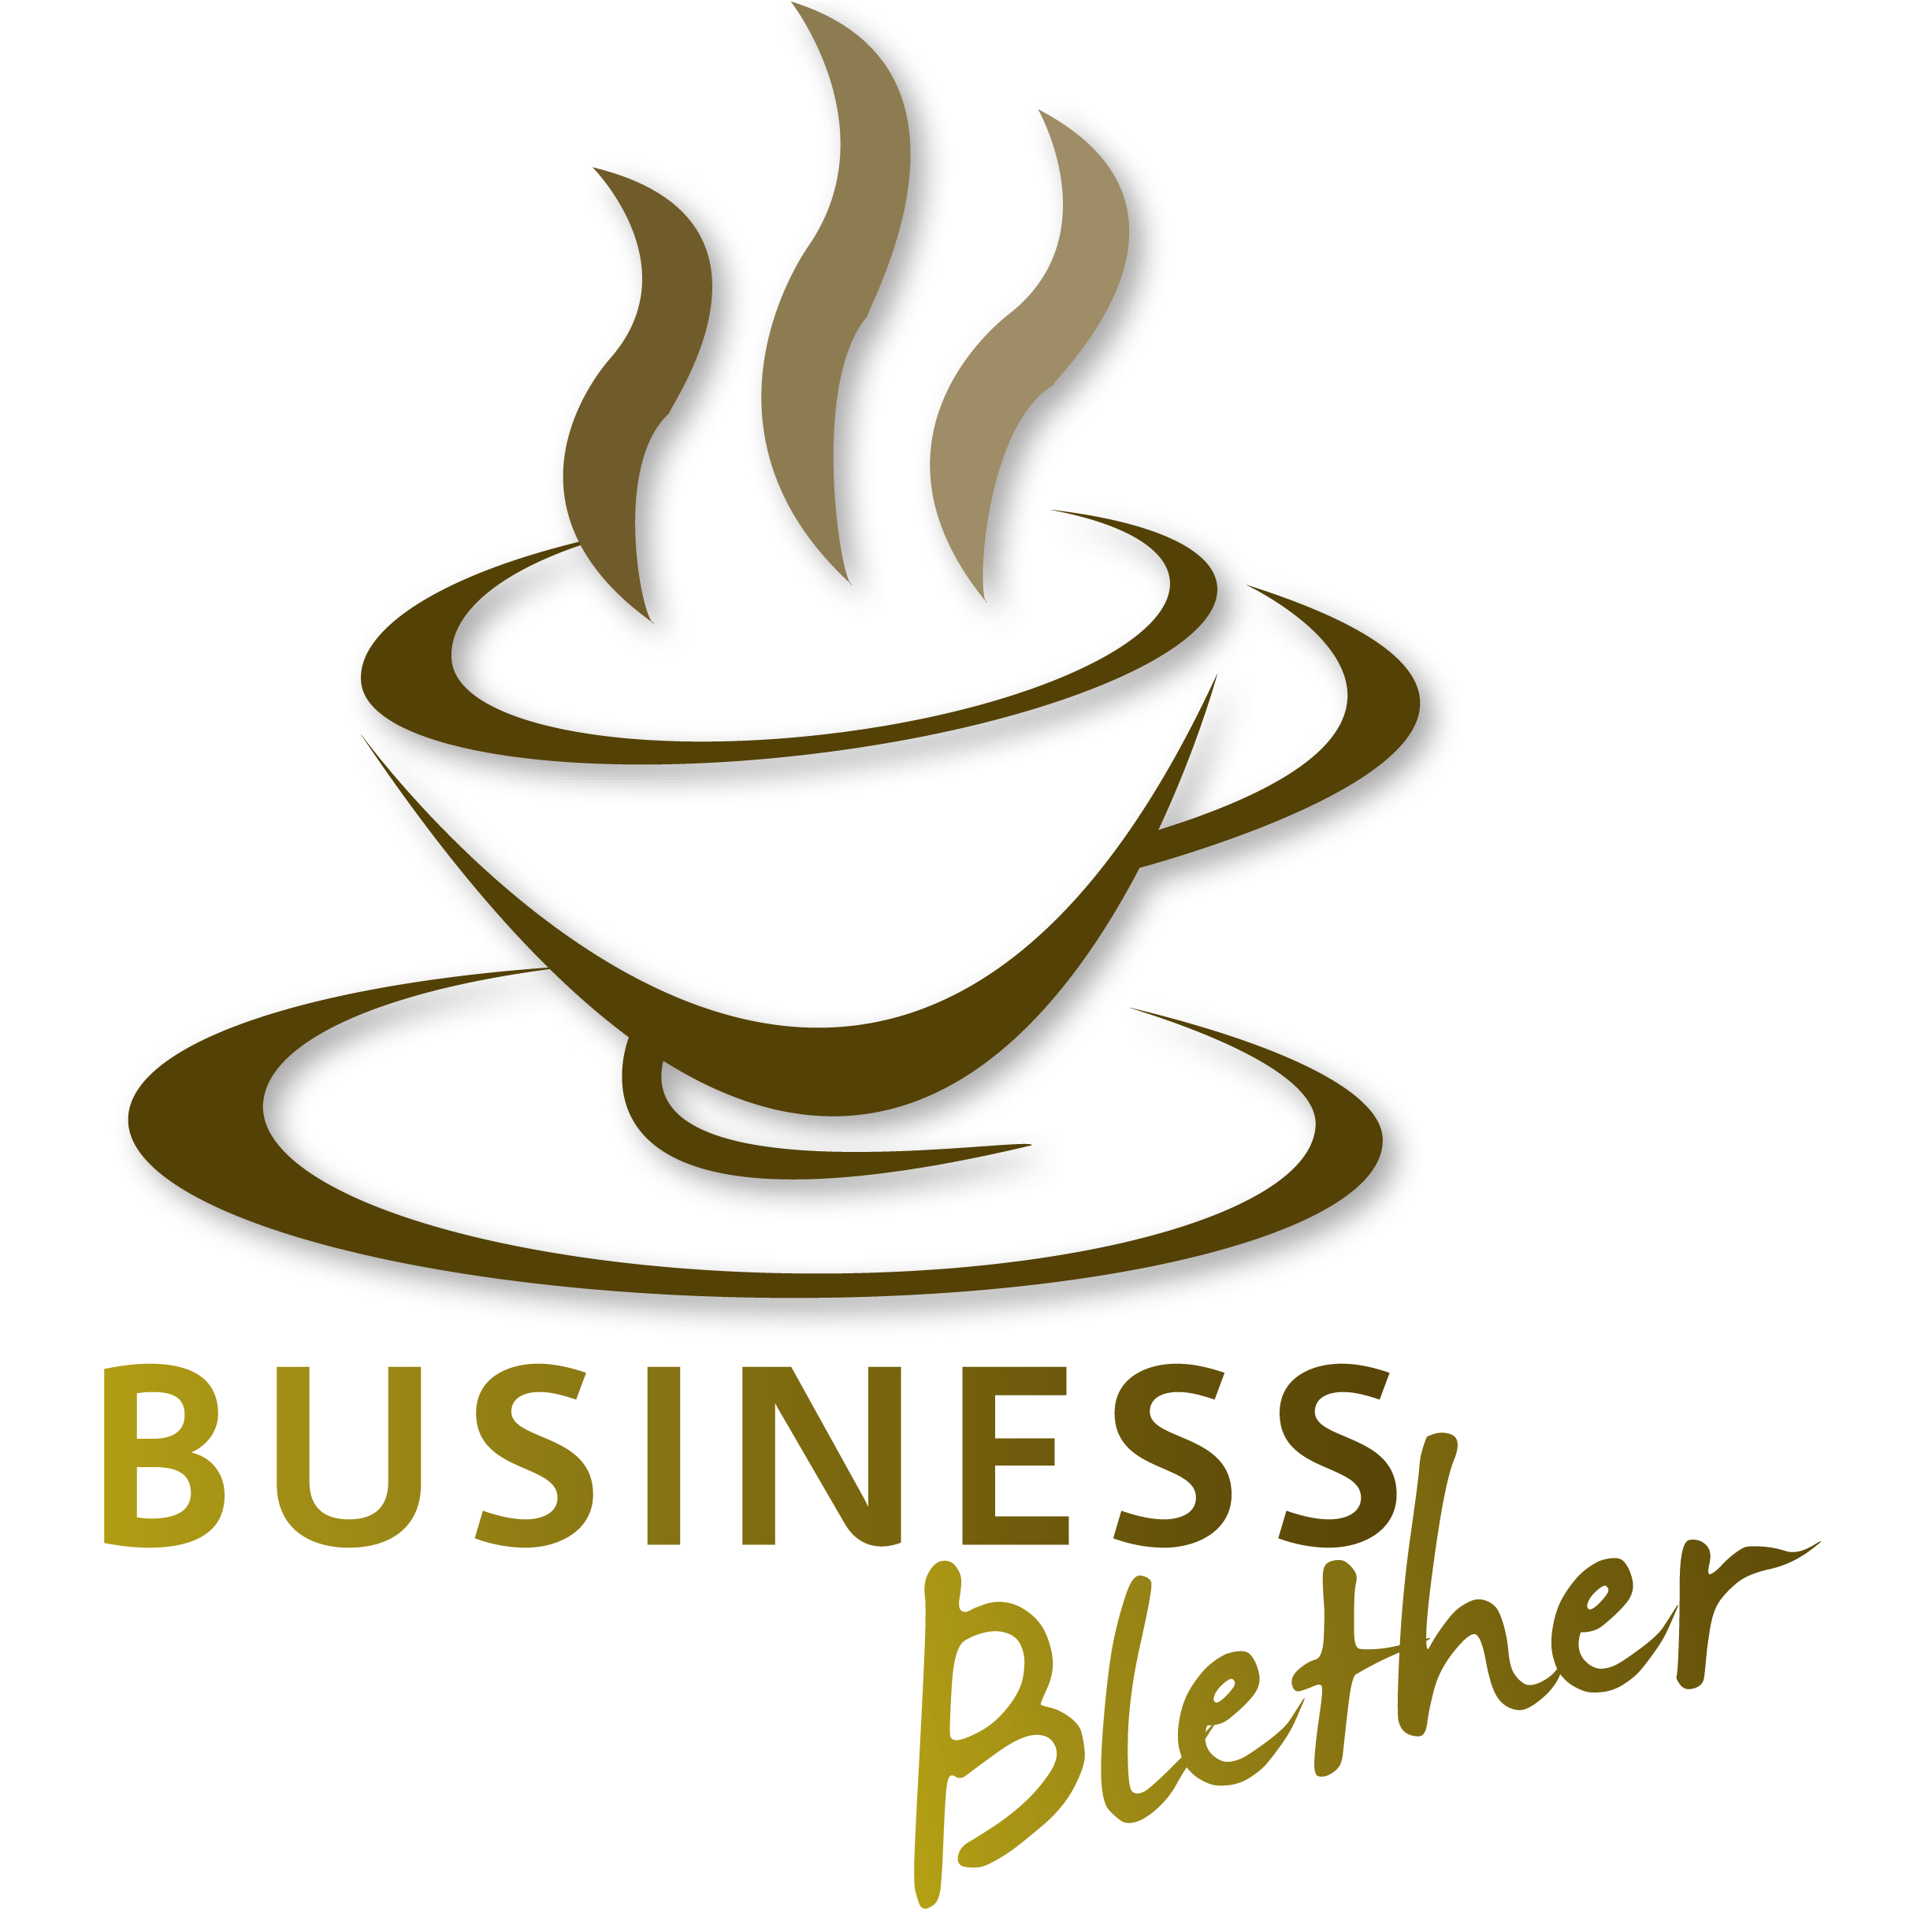 Fun, friendly networking group for businesses in the Stirling, Loch Lomond & Trossachs National Park area. NEXT EVENT Wed 3rd May 10am-11.30am @3sistersbake